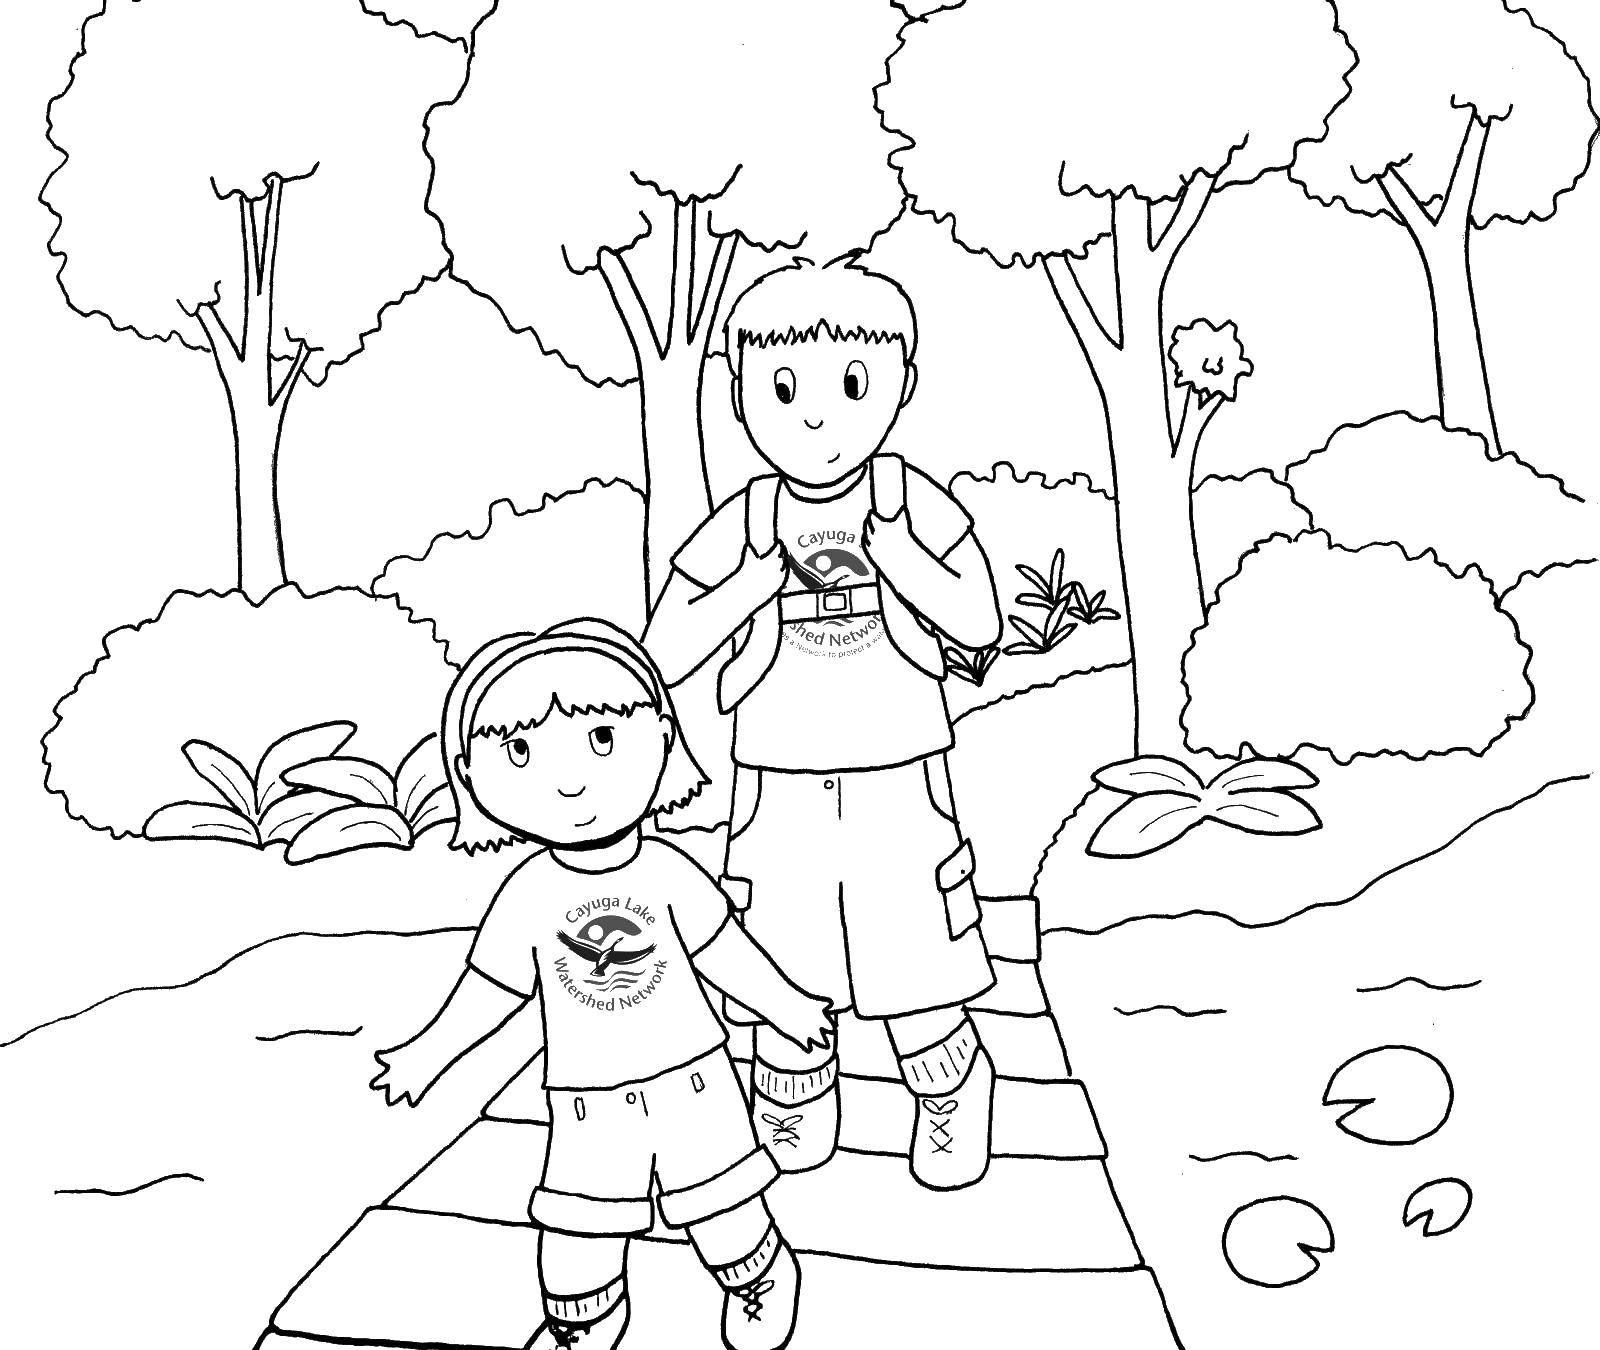 Coloring Boy and girl. Category Camping. Tags:  leisure, nature, children, hike.